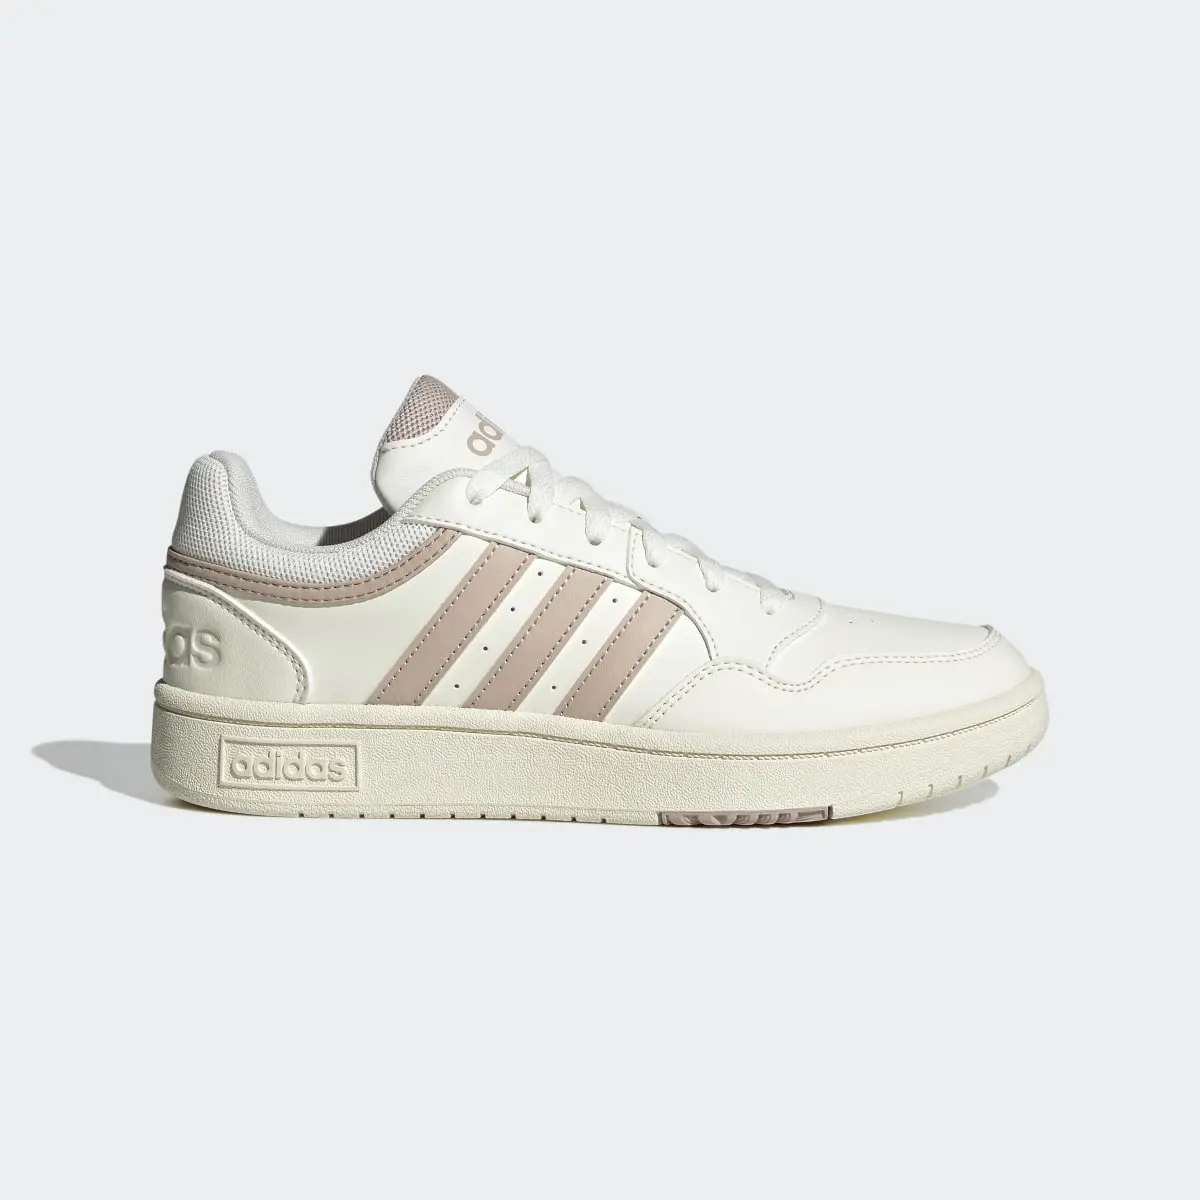 Adidas Hoops 3.0 Mid Lifestyle Basketball Low Schuh. 2